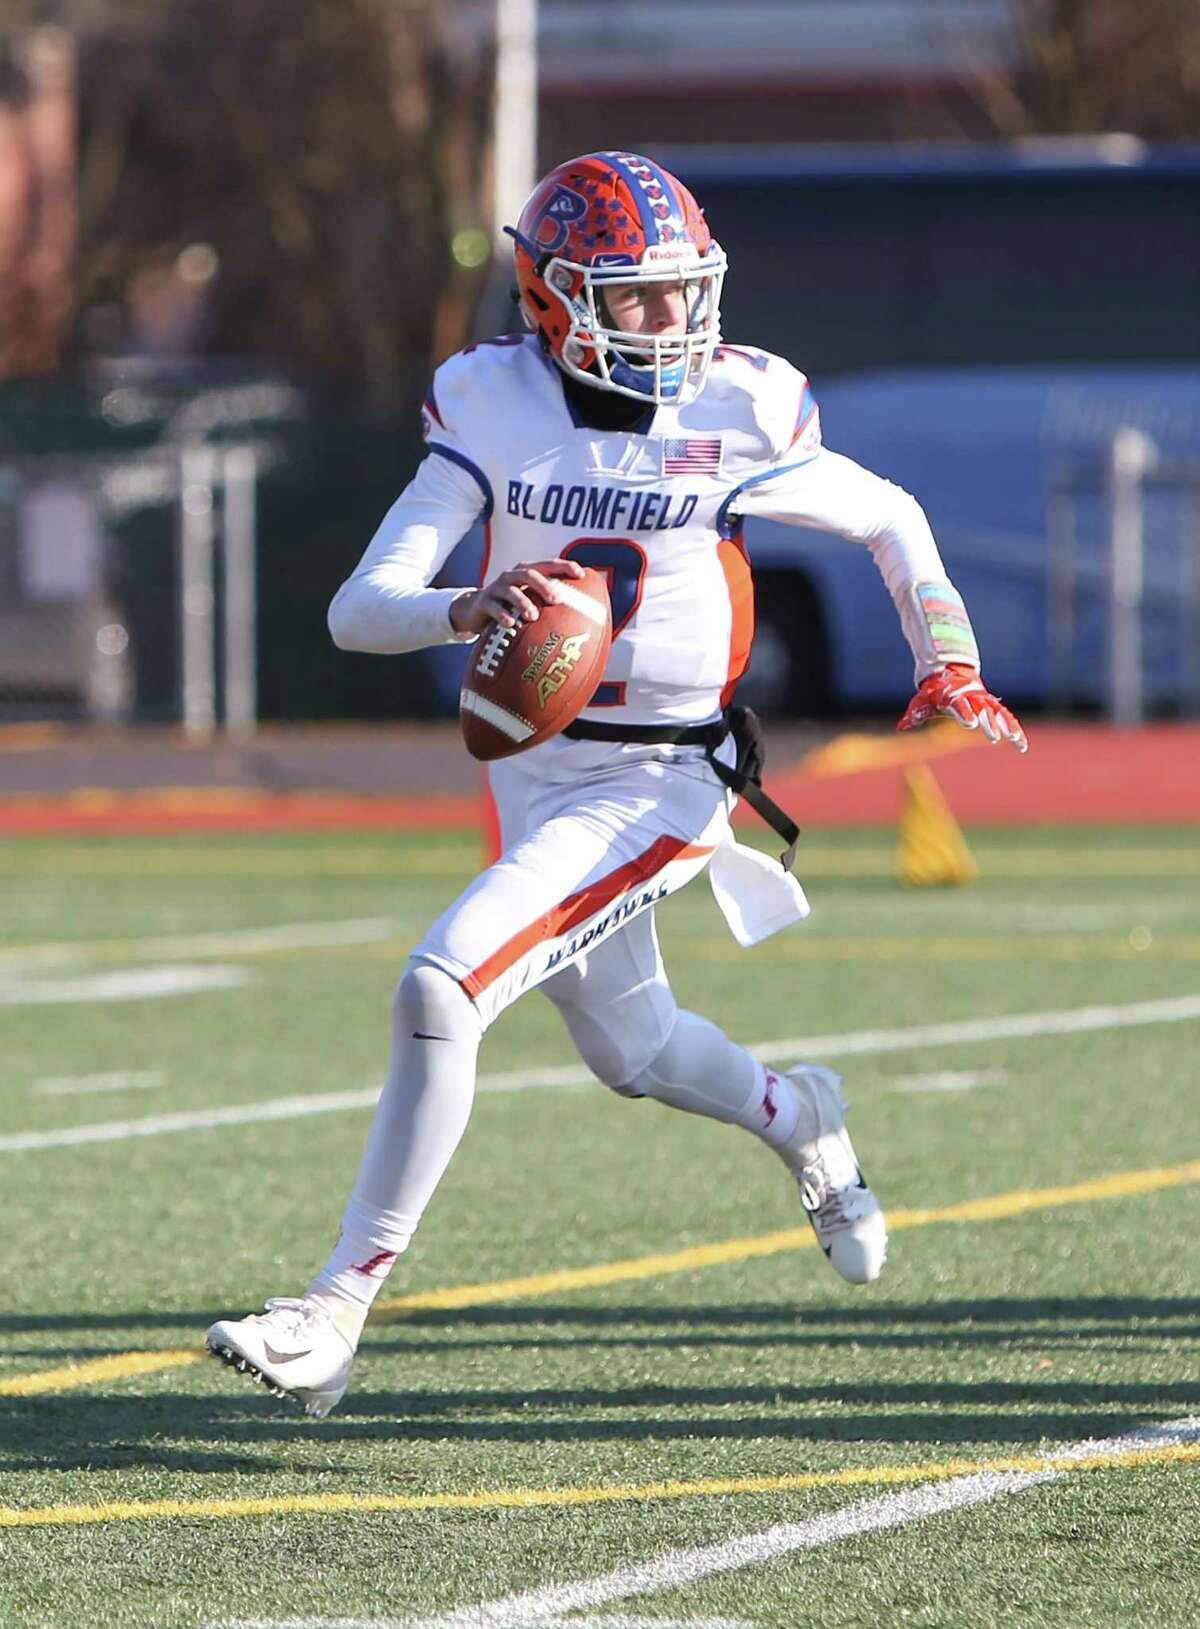 Bloomfield High School quarterback Daron Bryden throws on the move during the Class S Championship Game in New Britain against Haddam-Killingworth High School on Saturday, Dec. 8, 2018.